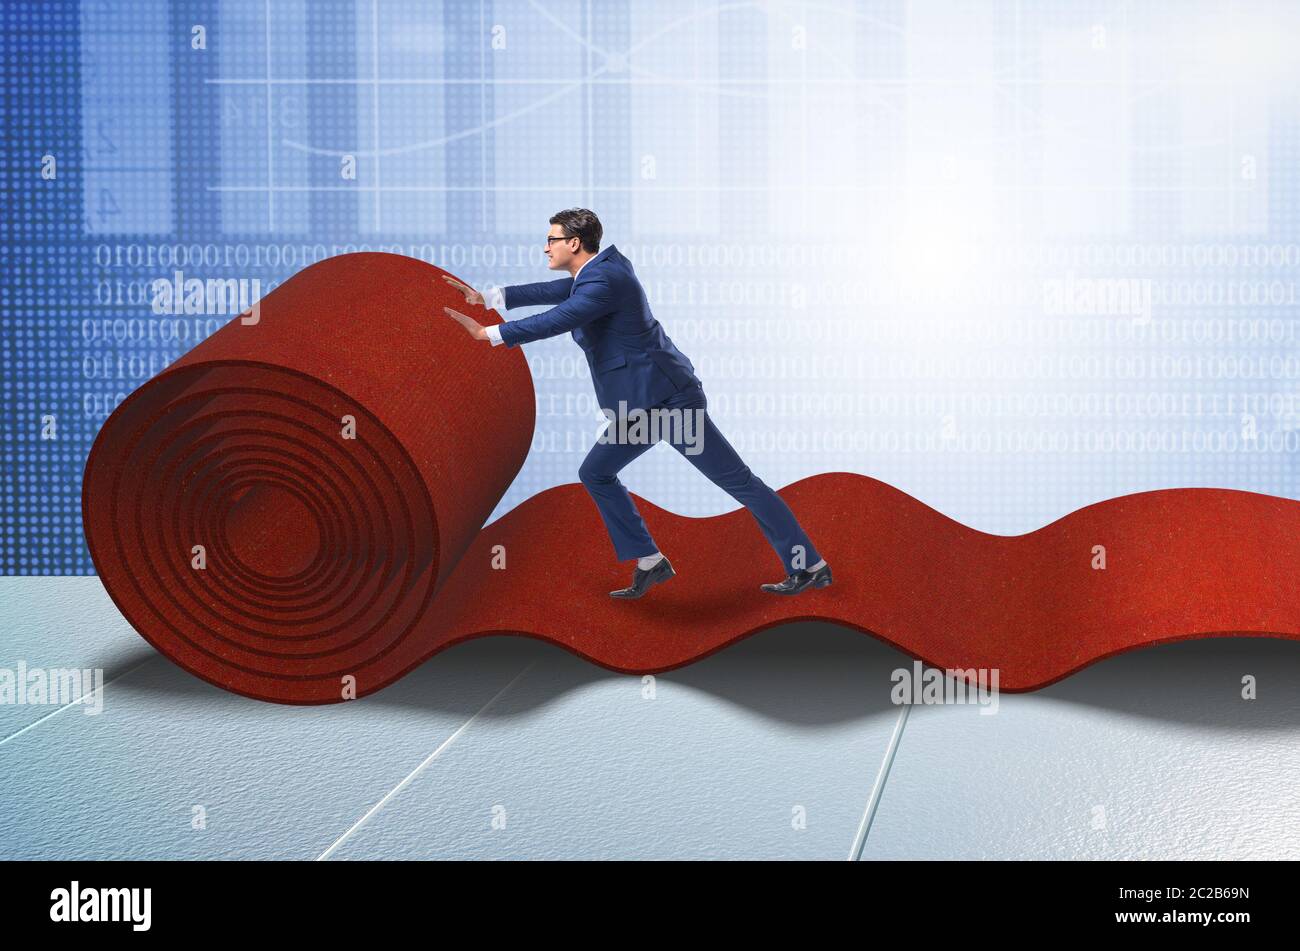 Business people in success concept with red carpet Stock Photo